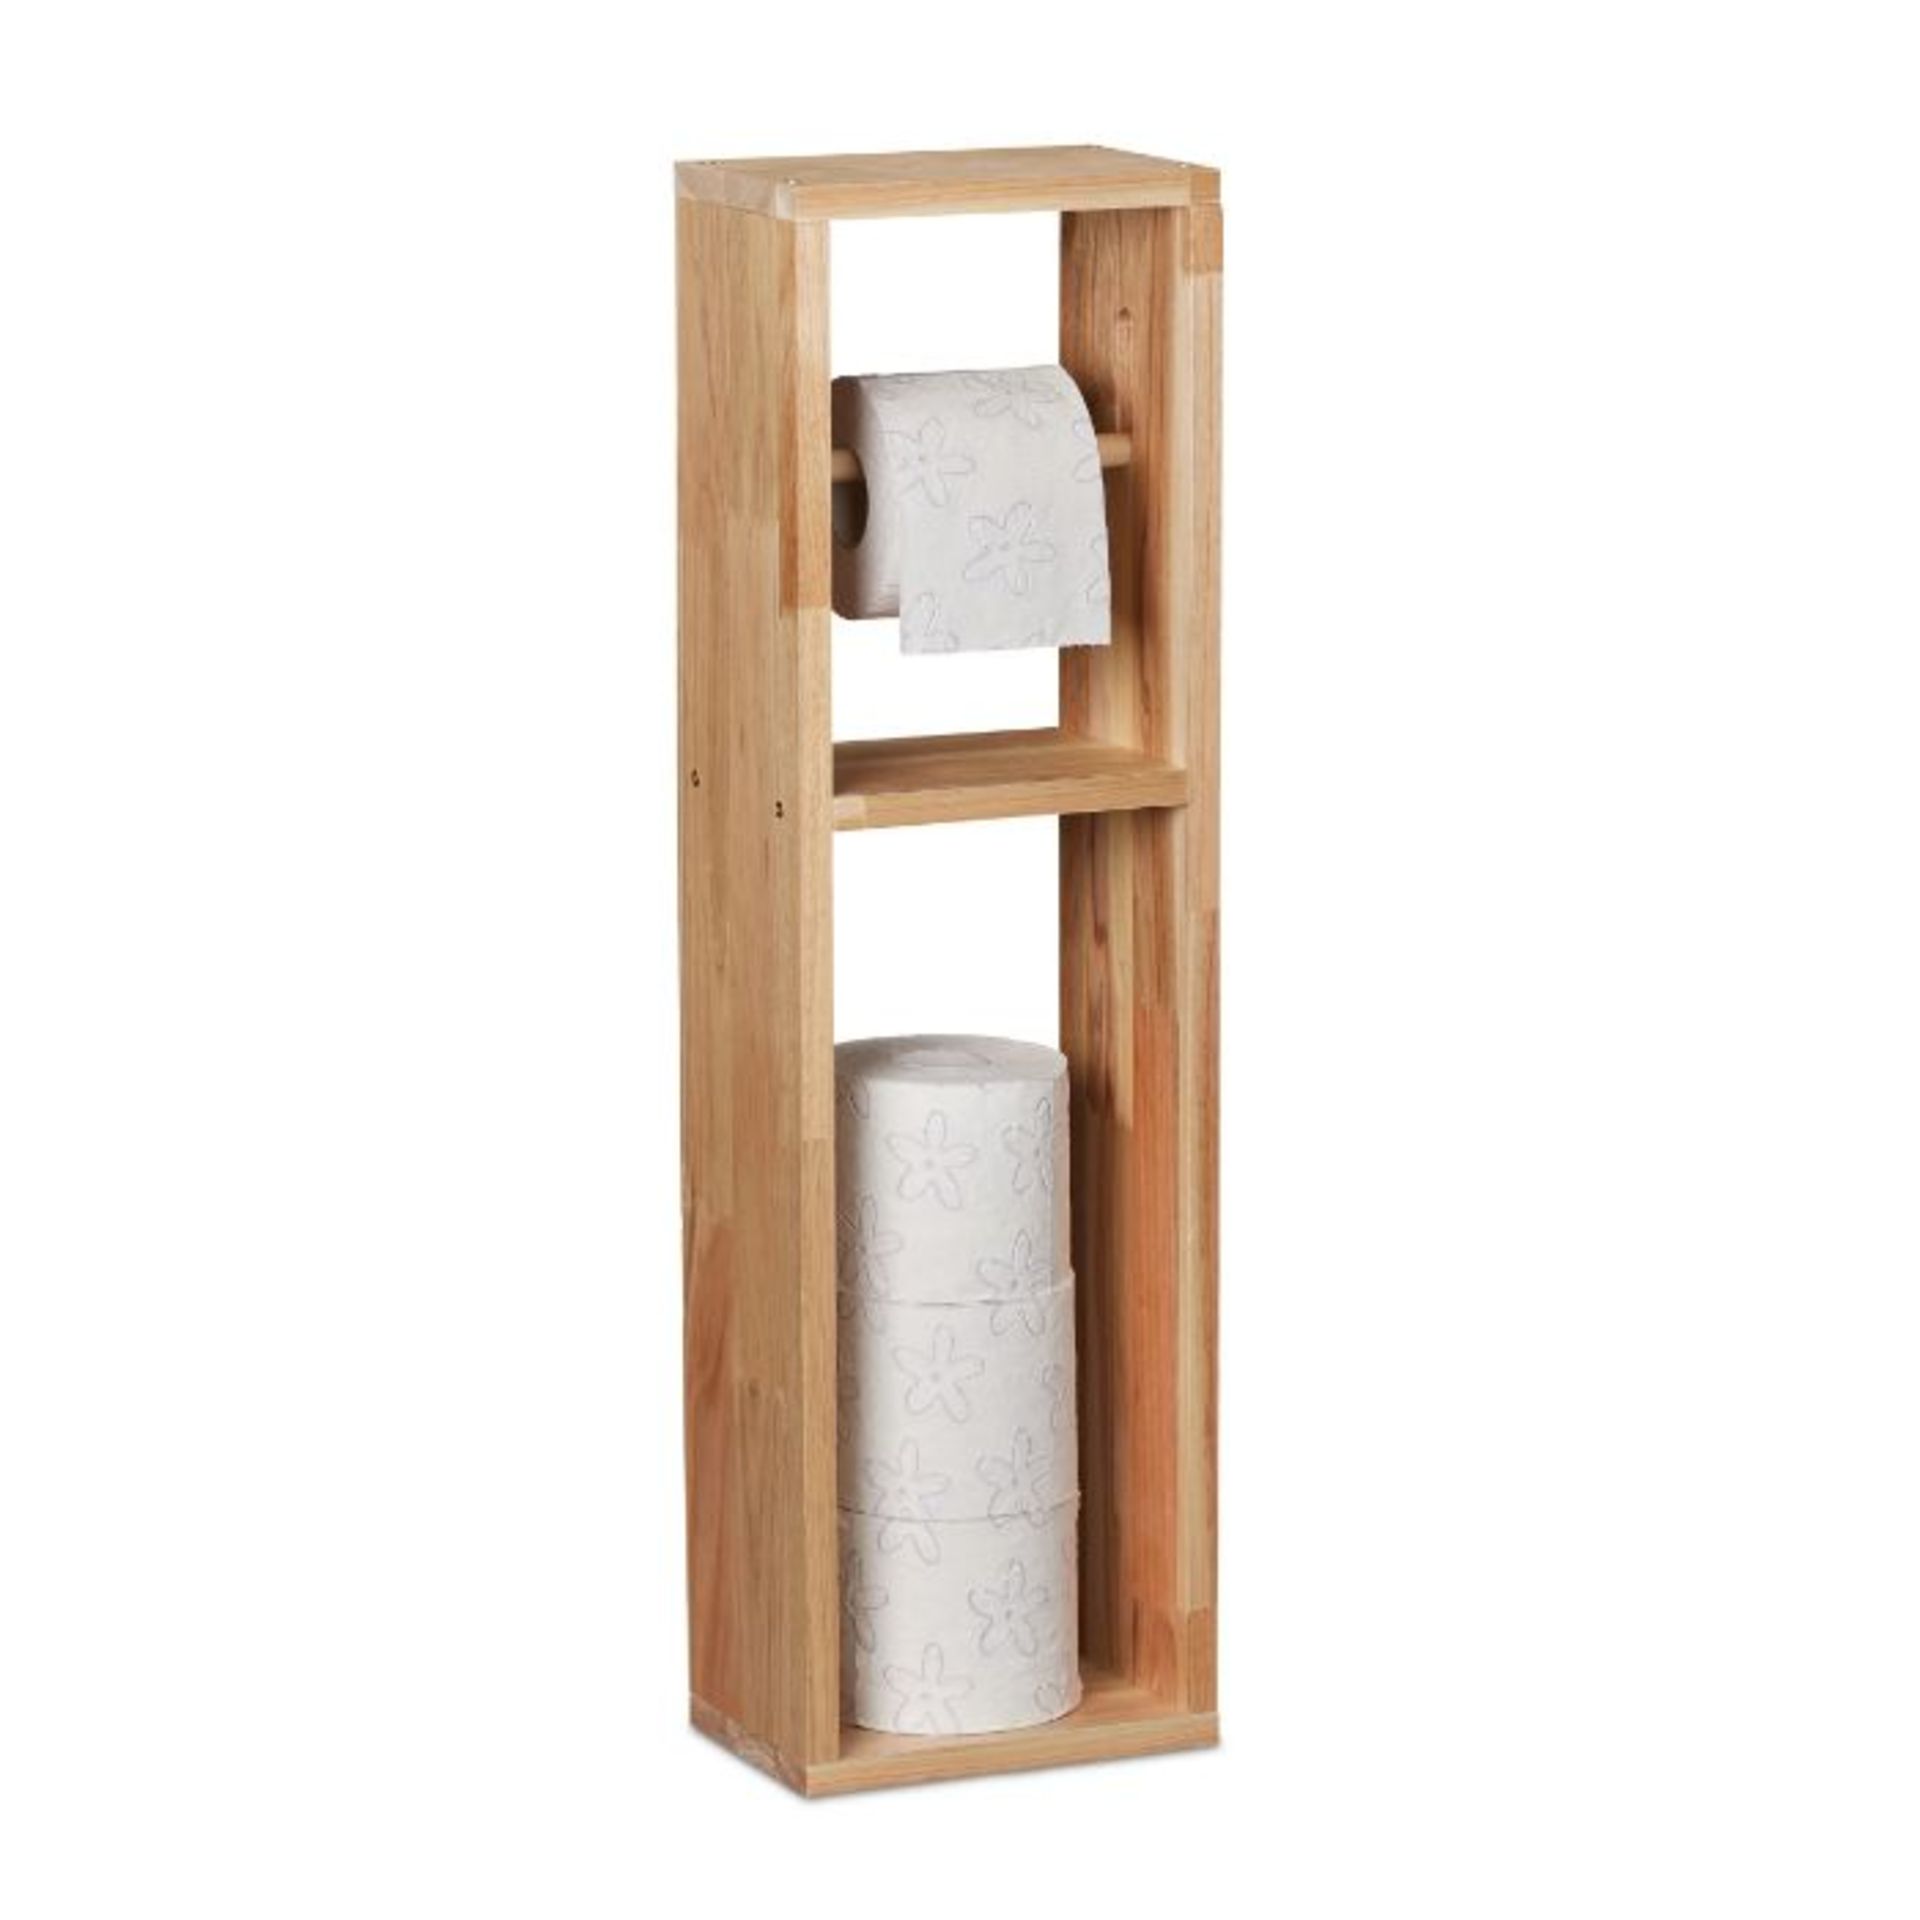 Rebrilliant, Lanza Free Standing/Wall Mounted Toilet Roll Holder (WALNUT FINISH) (70cm H X 20cm W